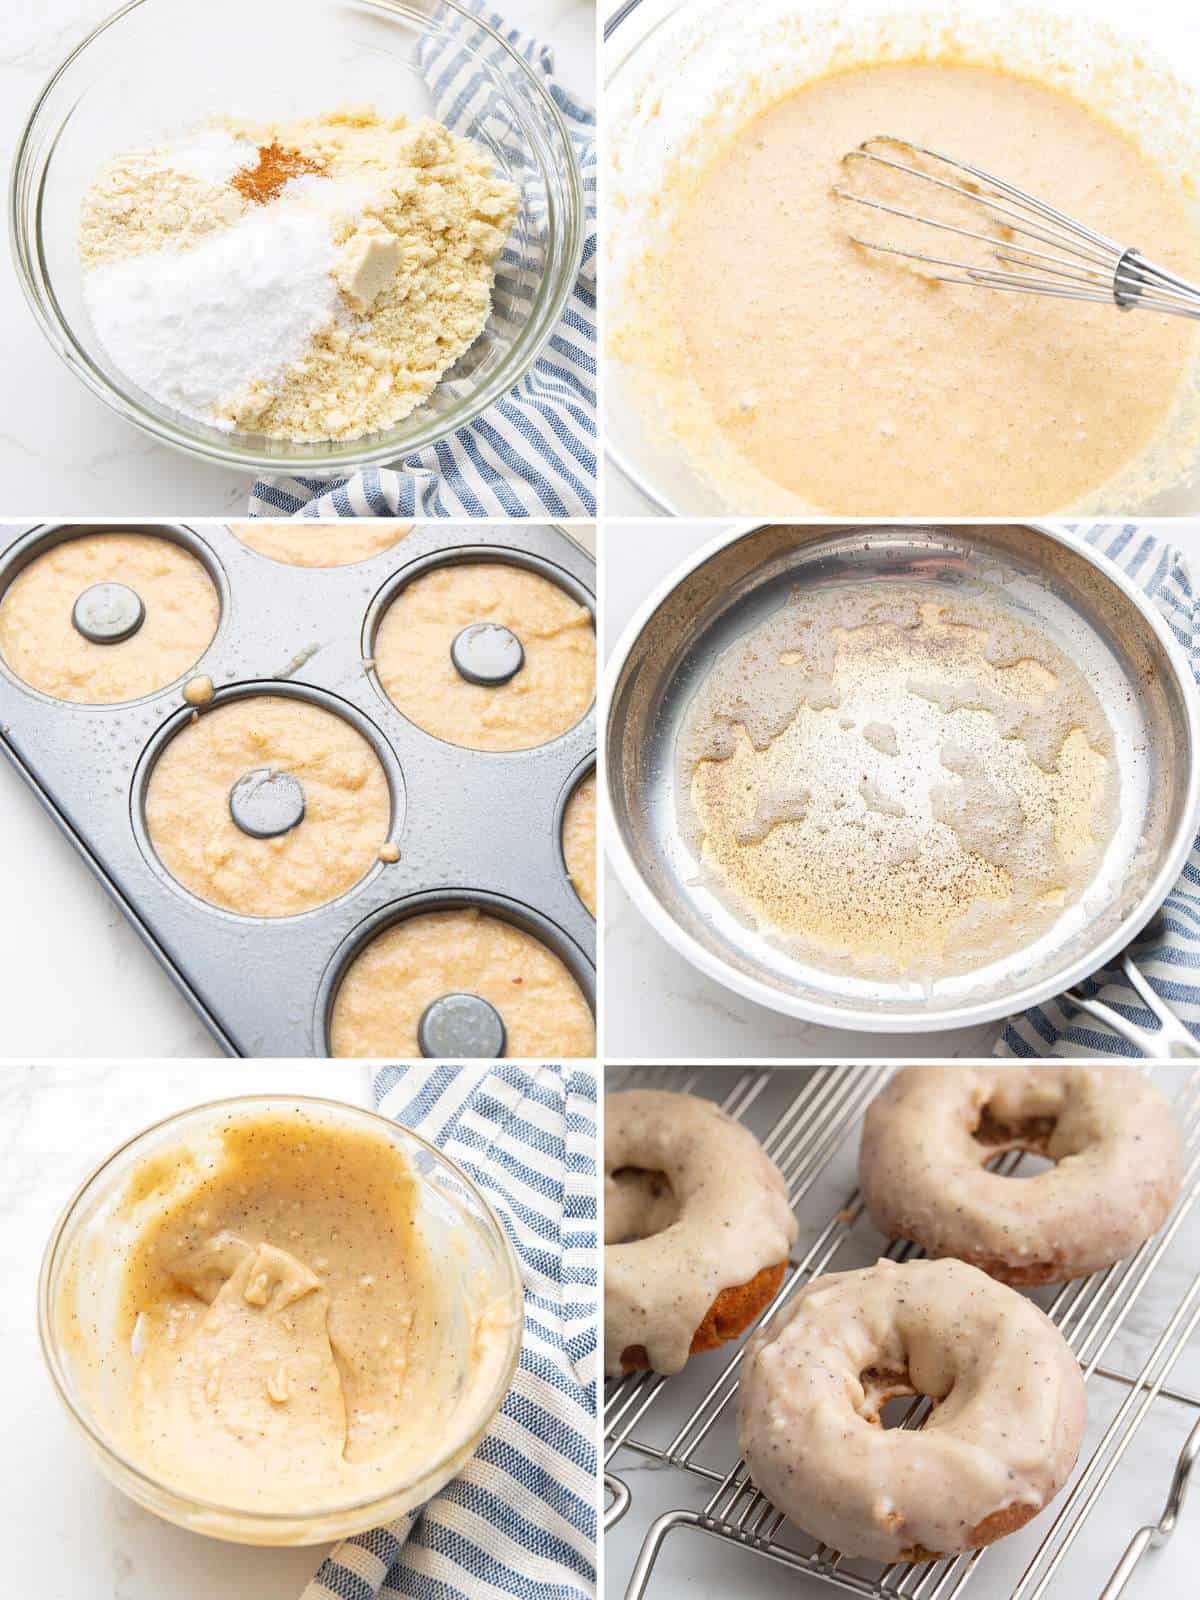 6 images showing the steps for making keto donuts with brown butter glaze.